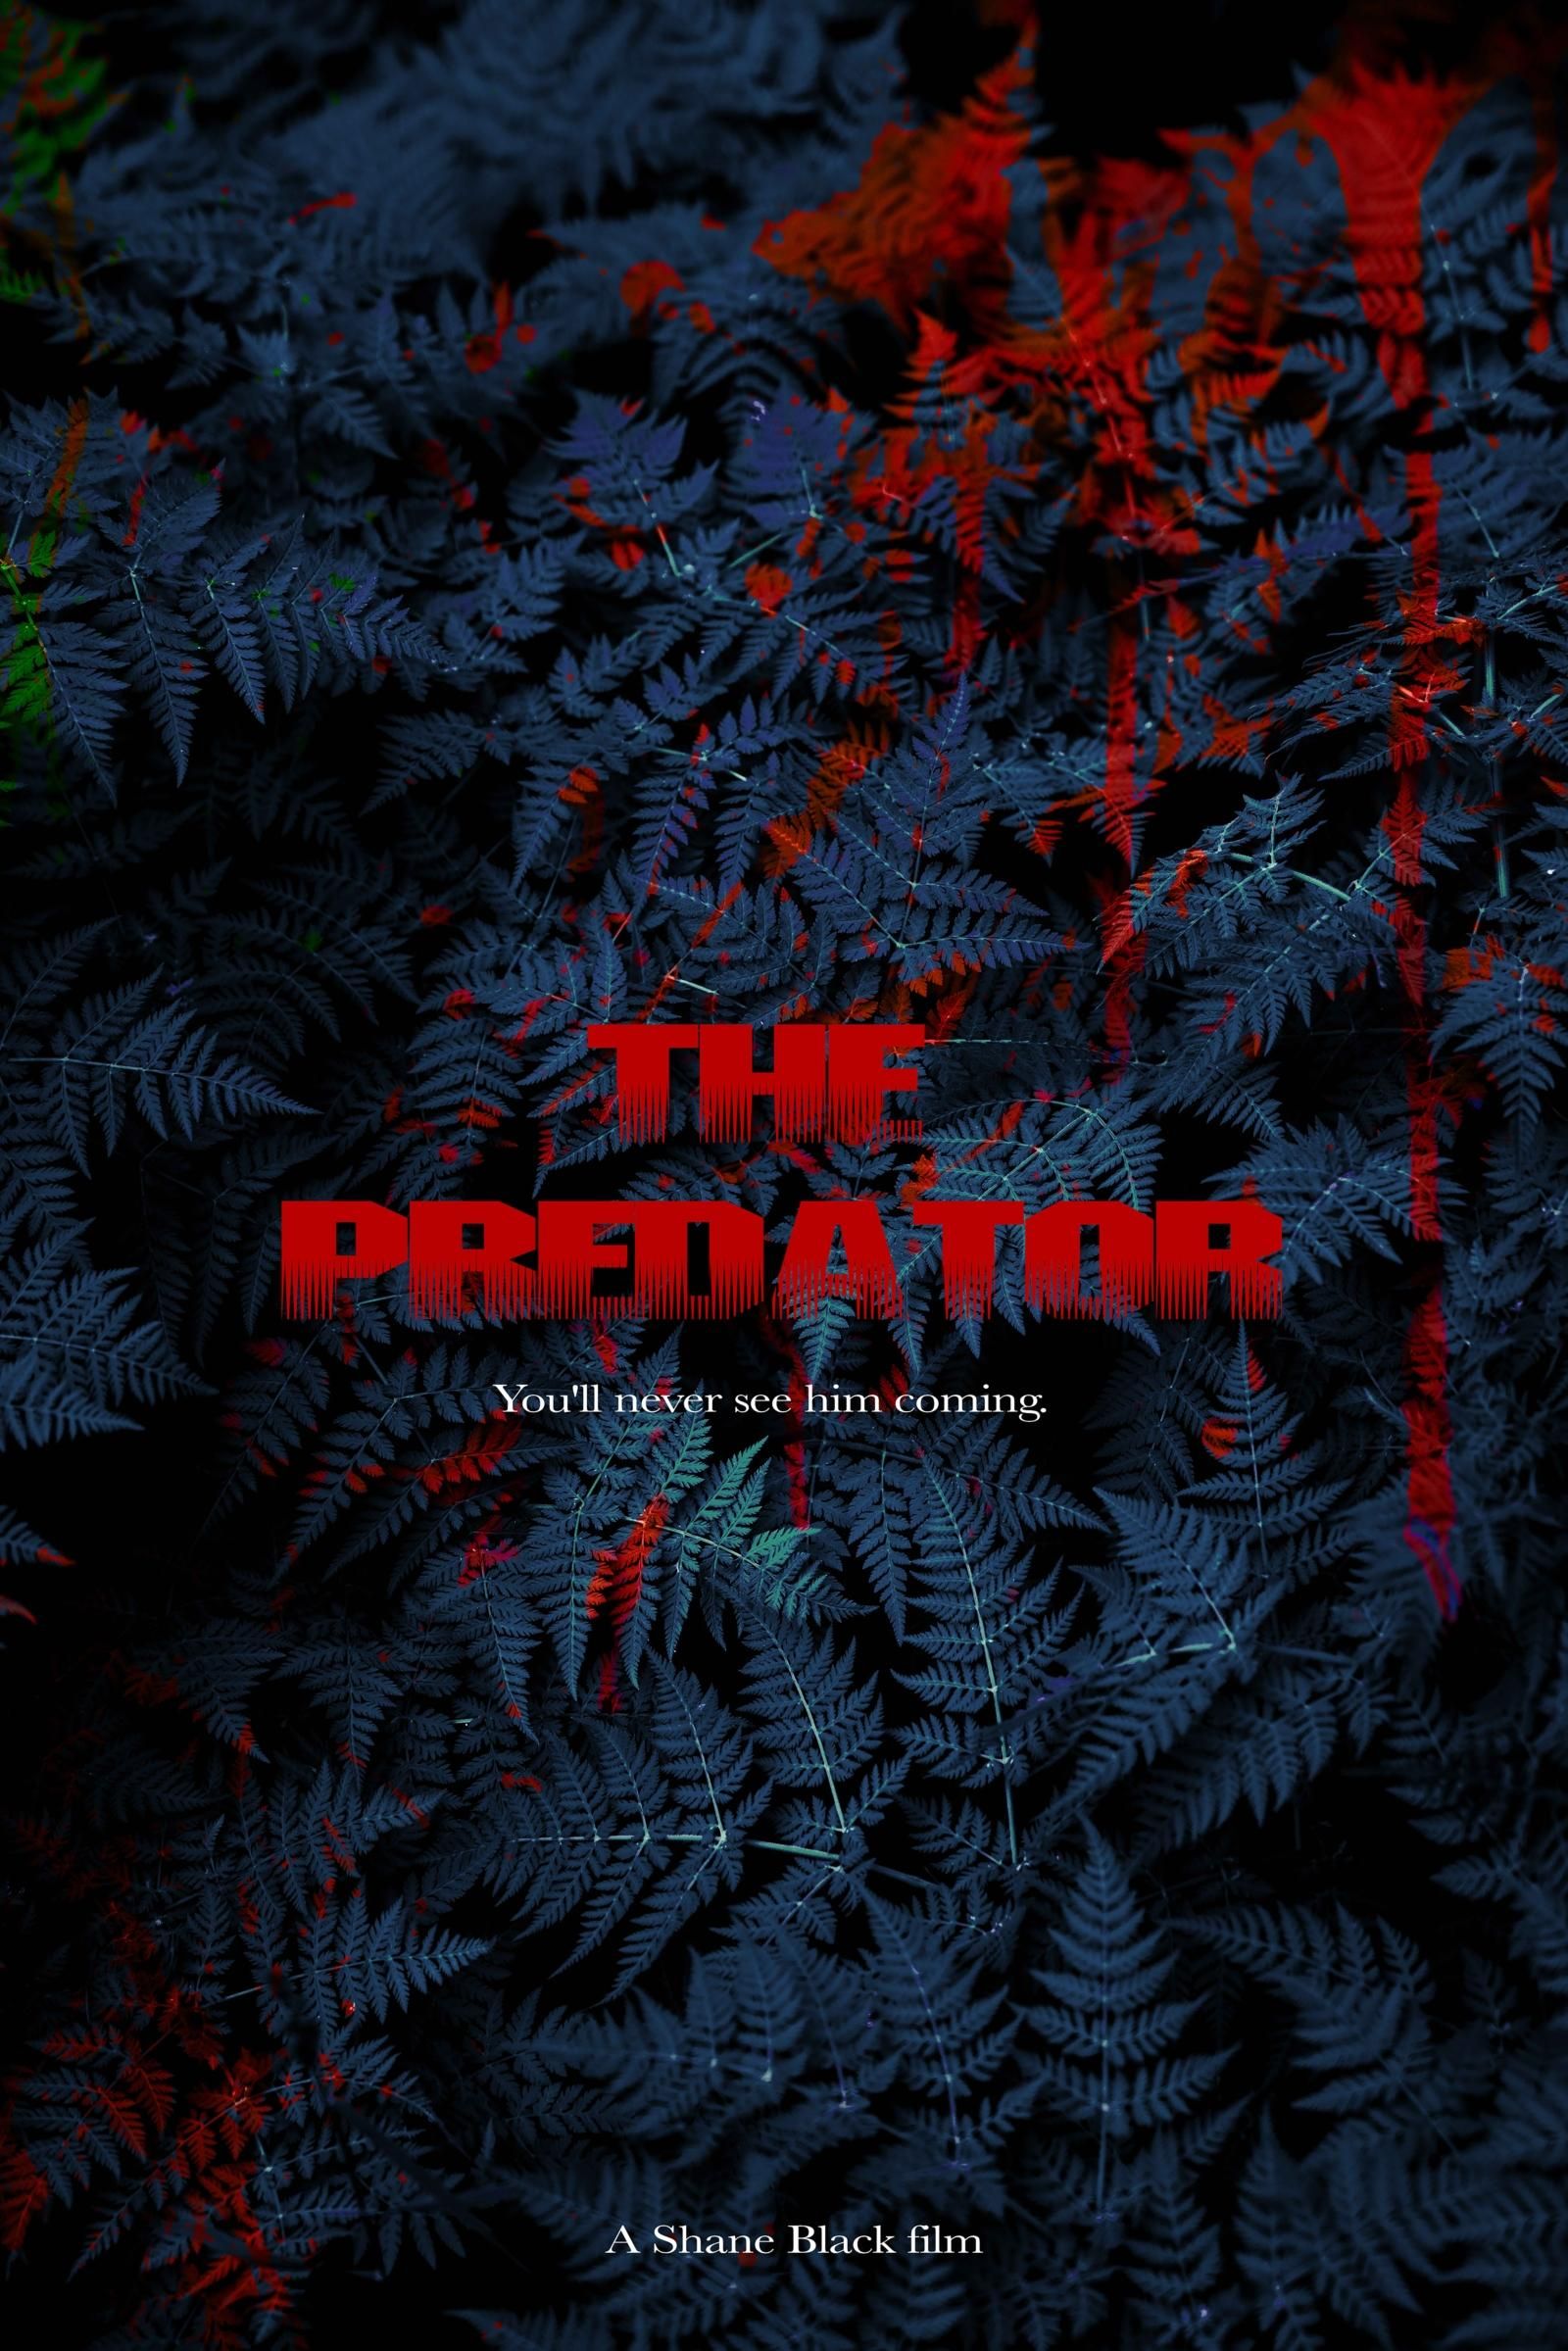 The Predator HD Wallpaper From Gallsource With Image